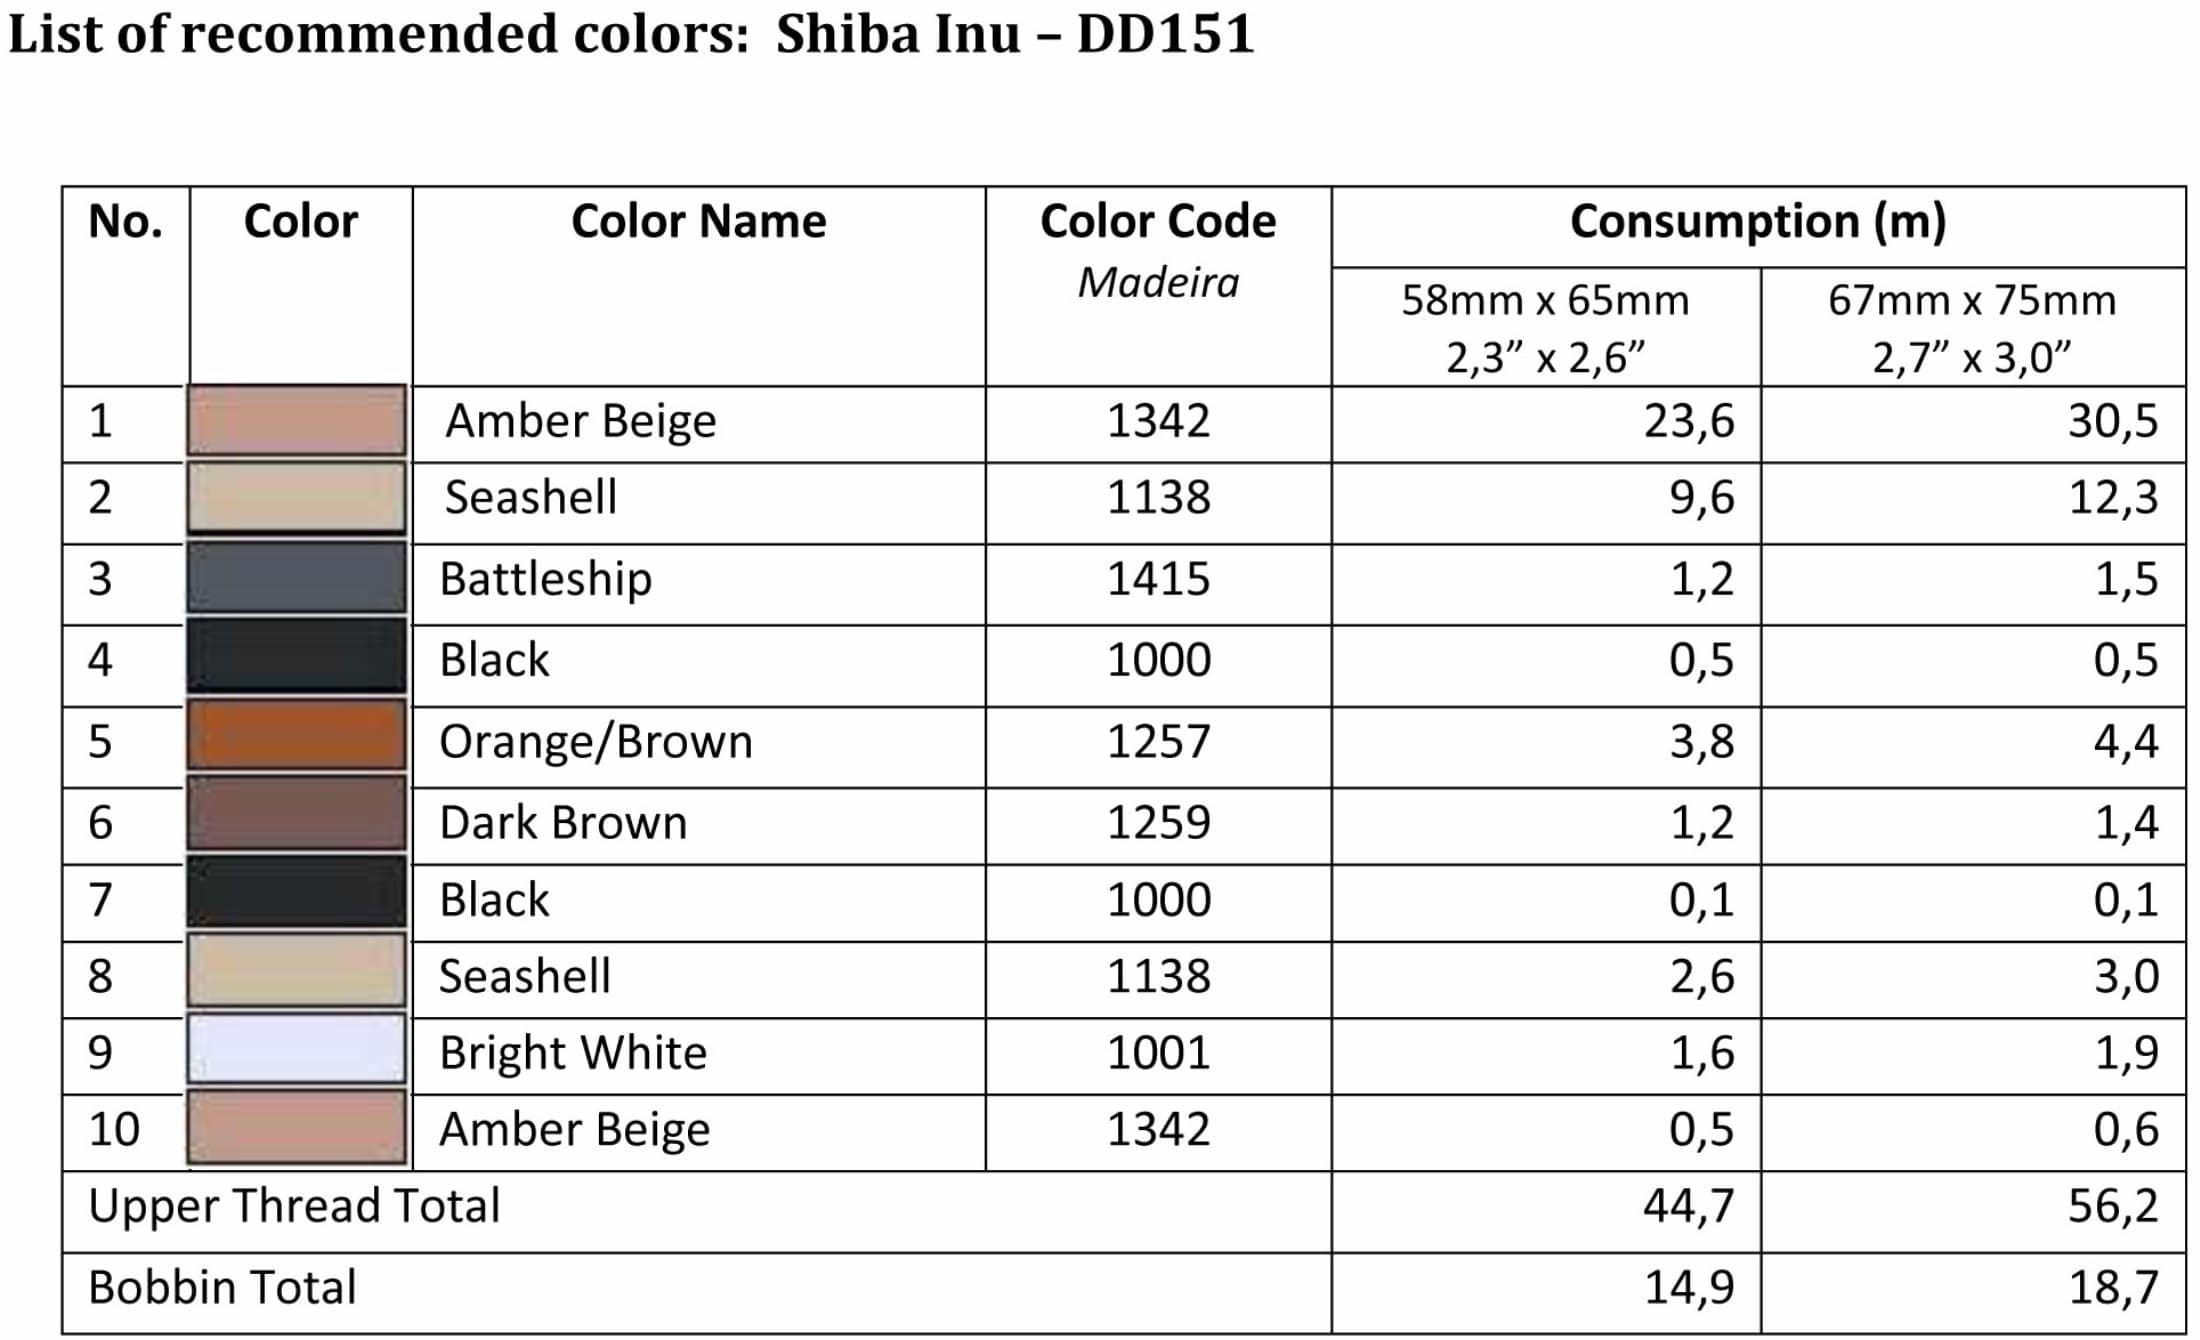 List of recommended colors - Shiba Inu - DD151